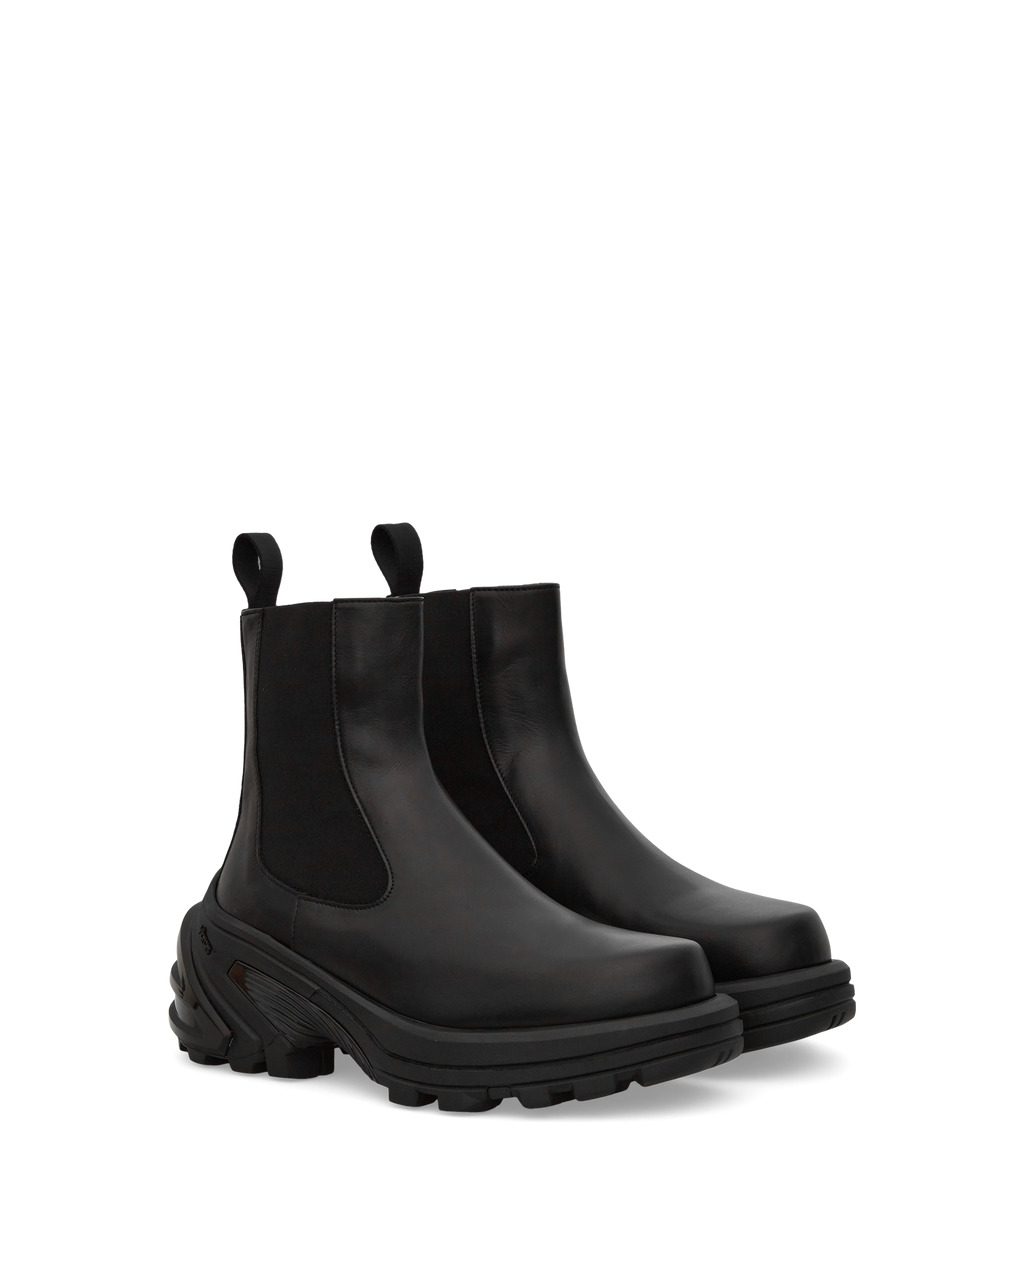 CHELSEA BOOT W/ REMOVABLE SKX SOLE - 2